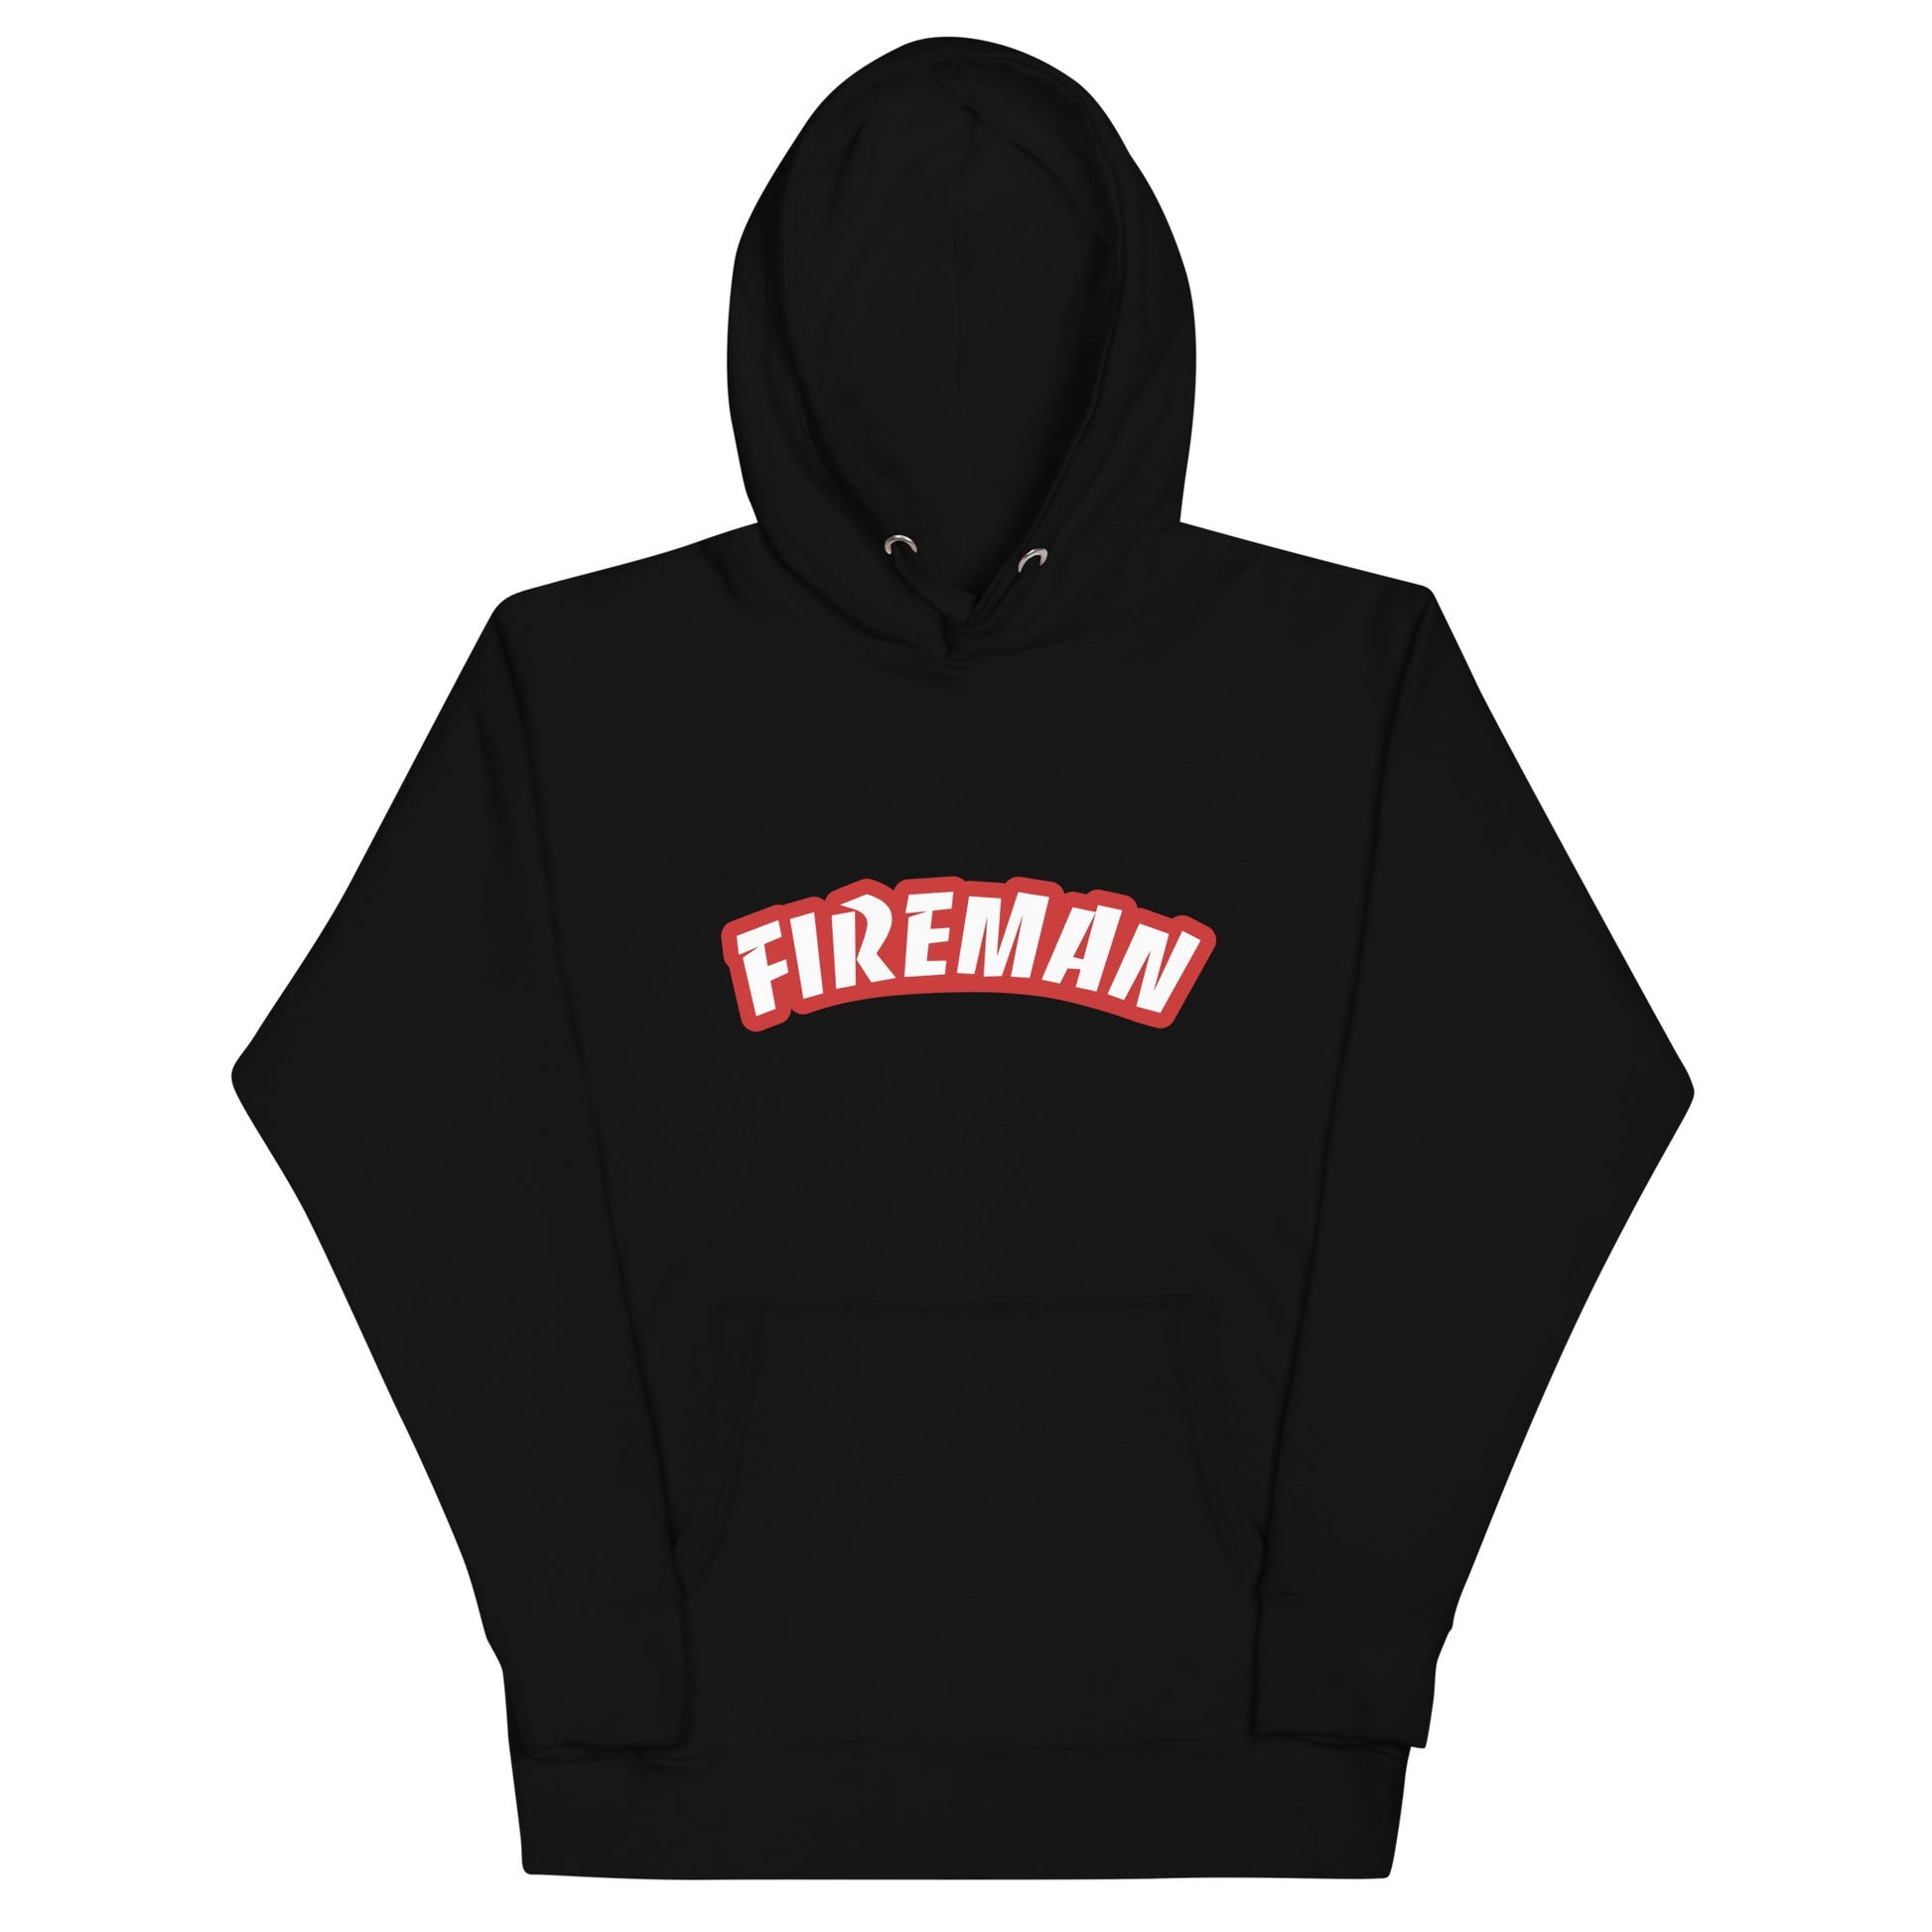 Folded black hoodie with Fireman text on white background